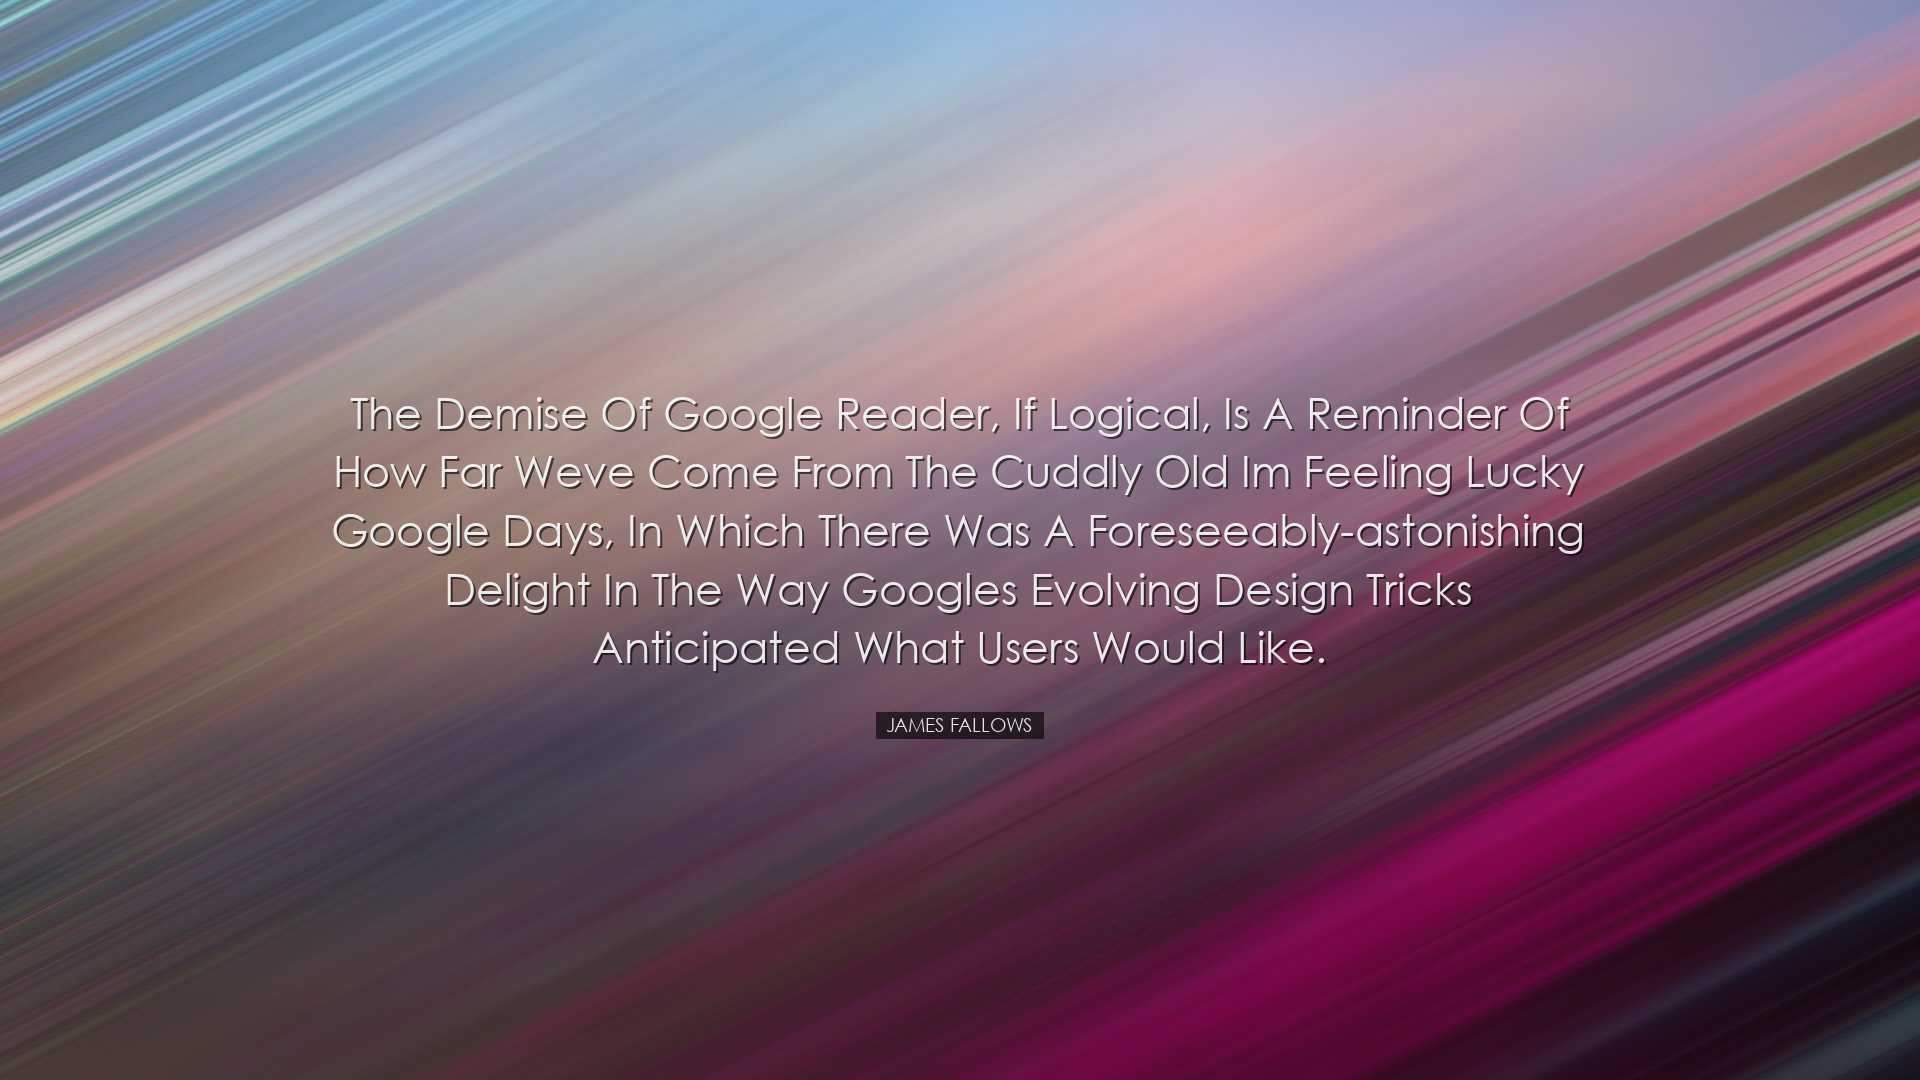 The demise of Google Reader, if logical, is a reminder of how far